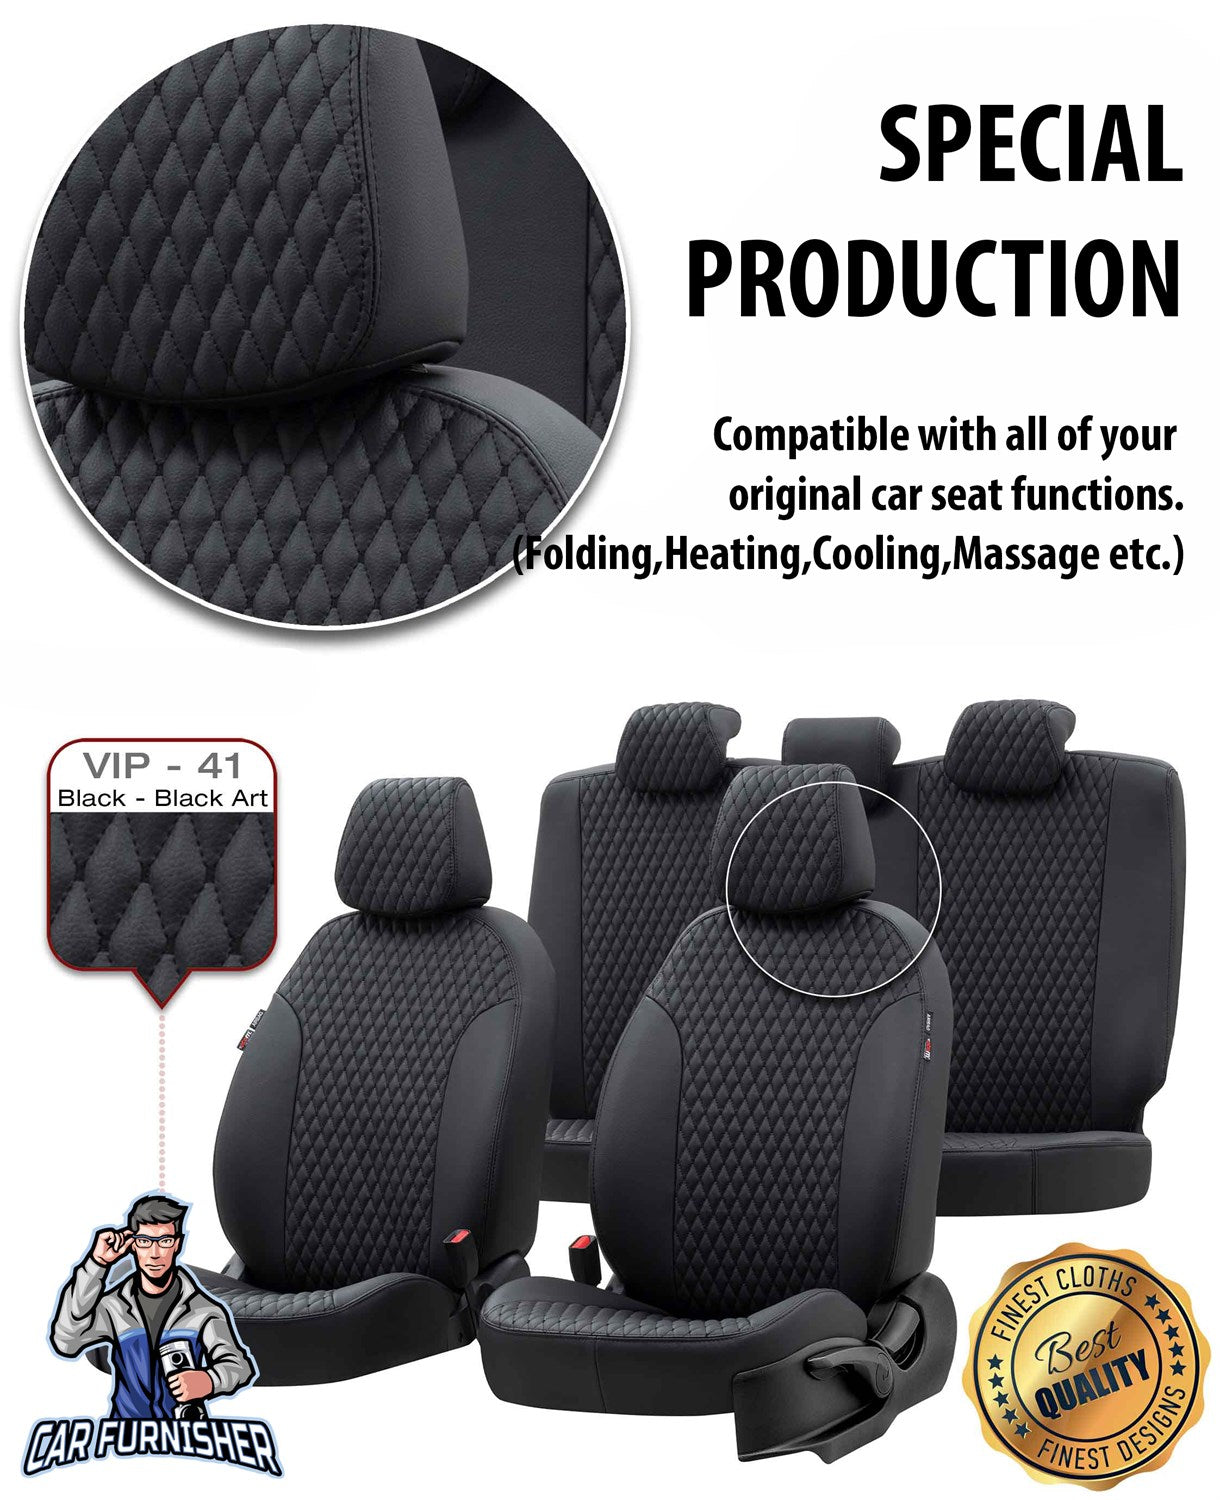 Dfm Succe Seat Covers Amsterdam Leather Design Black Leather